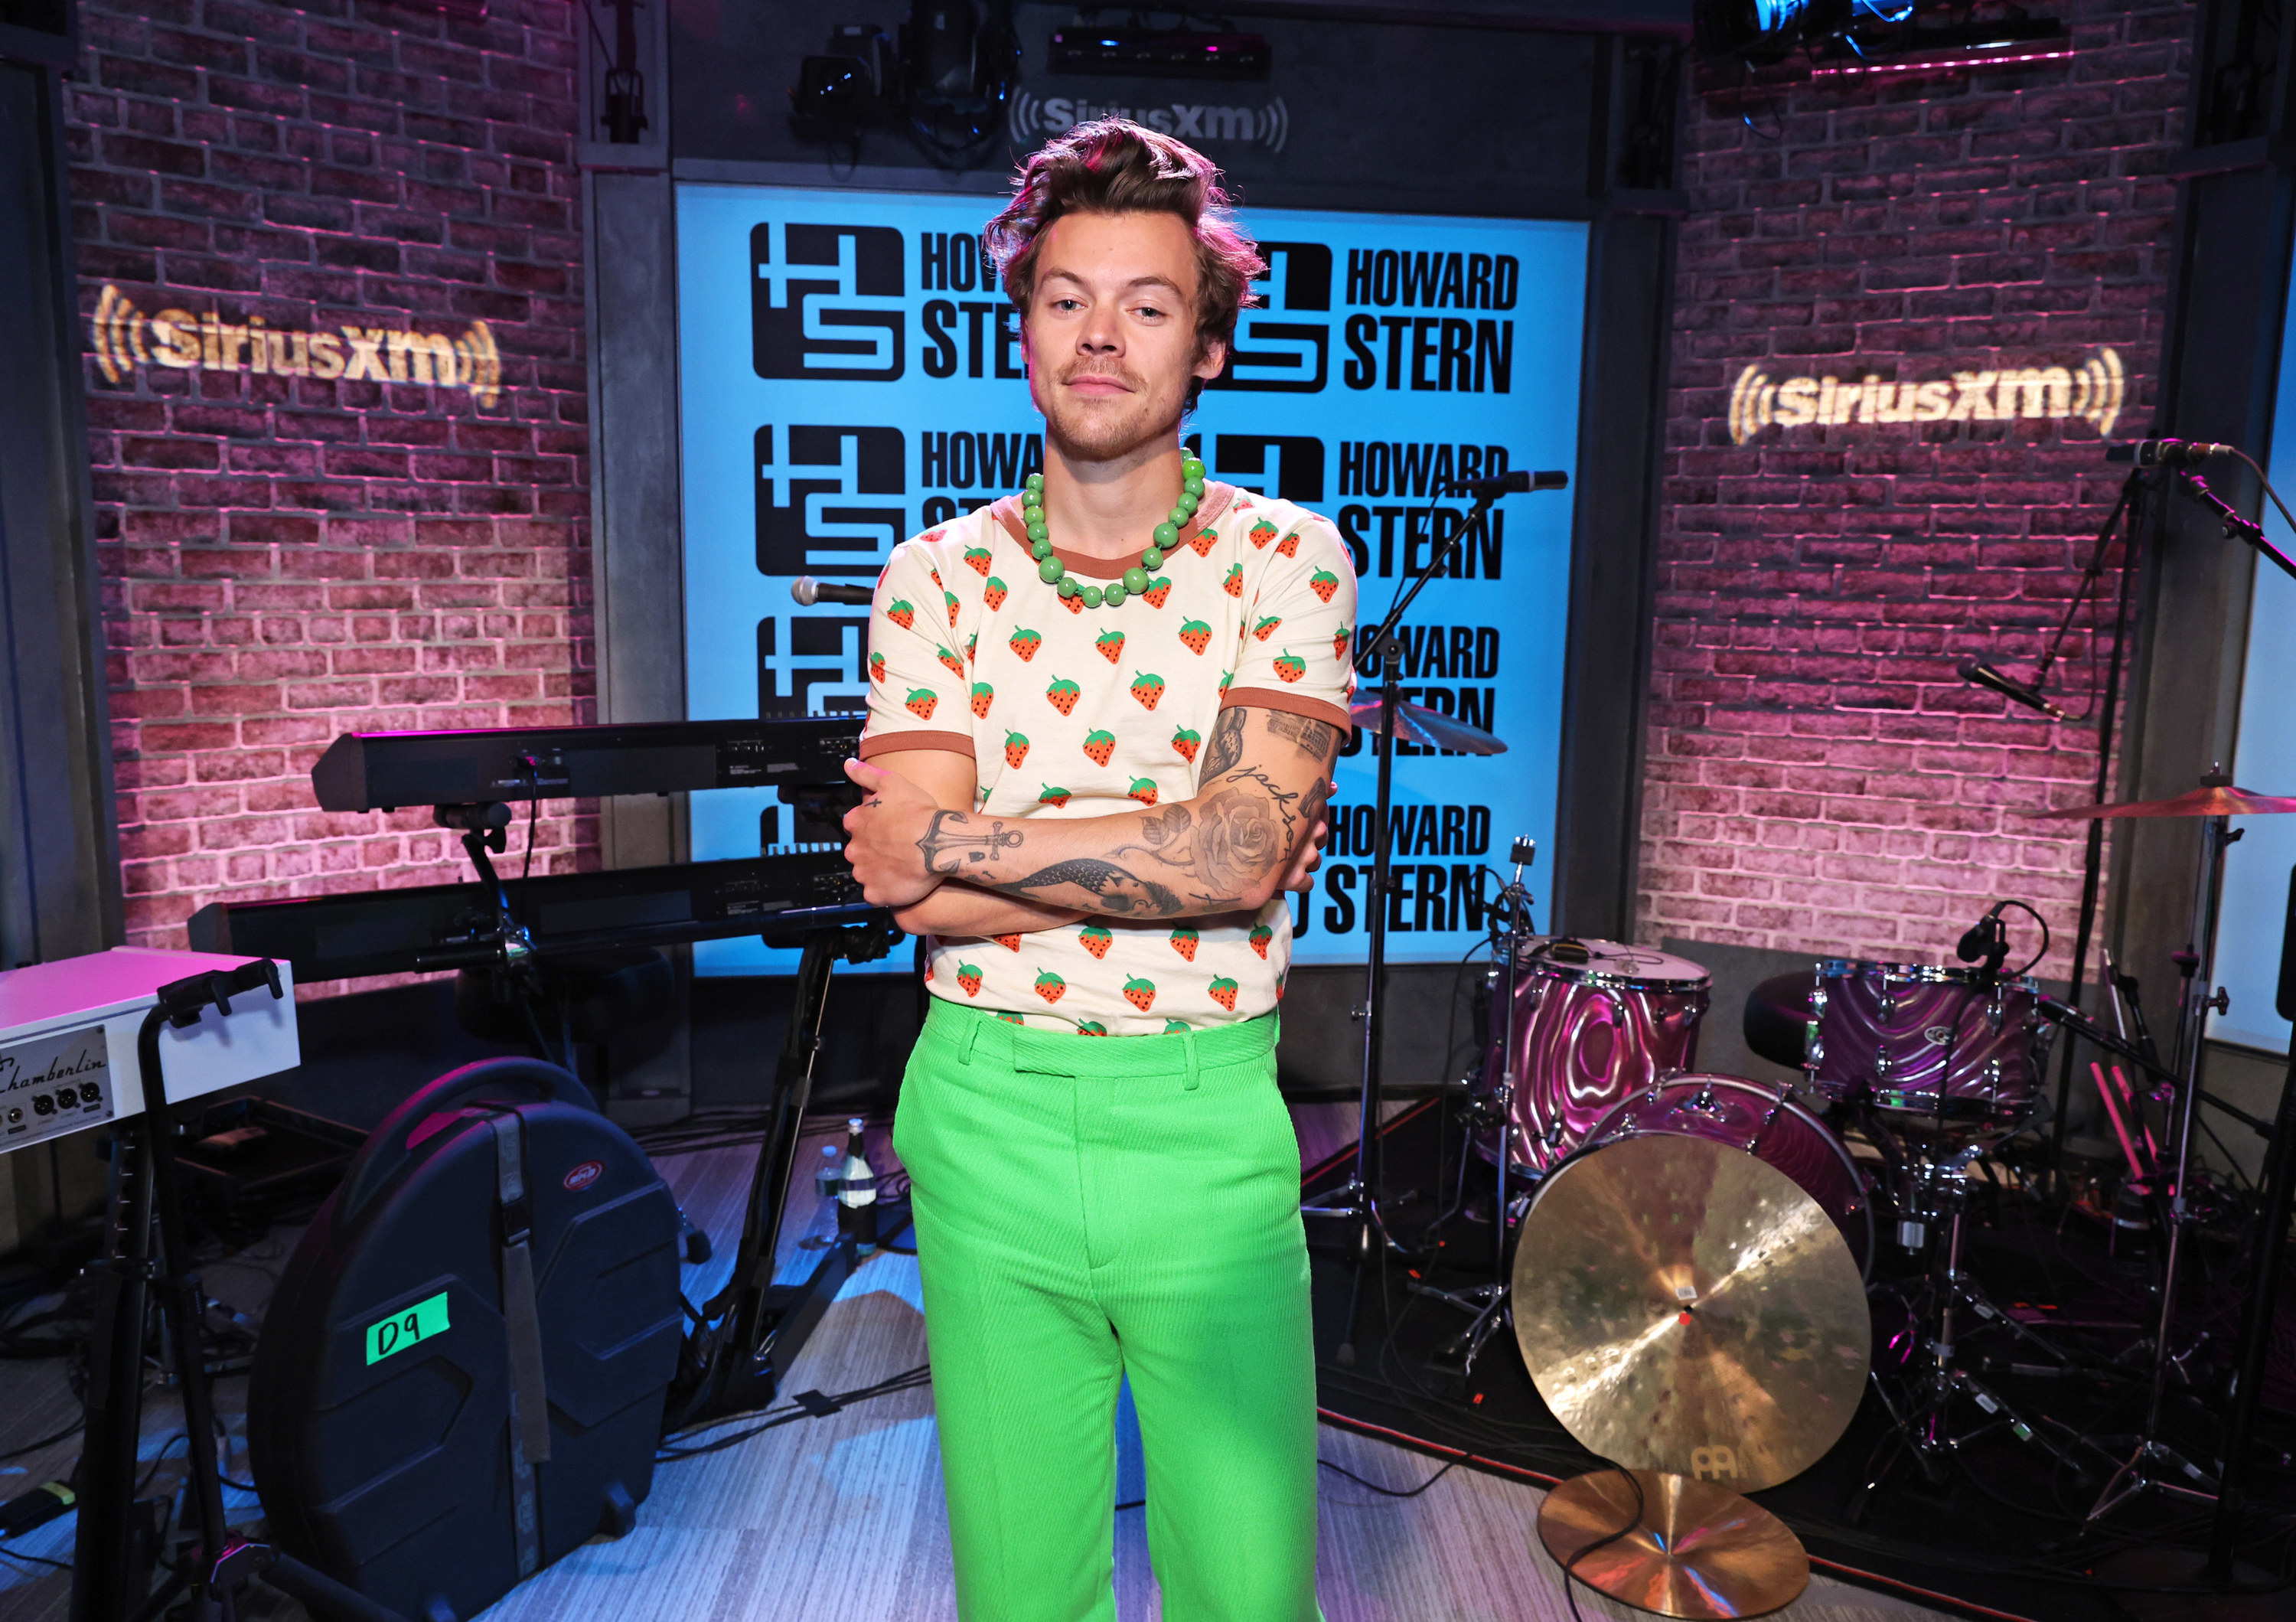 Harry posing at the SiriusXM stage